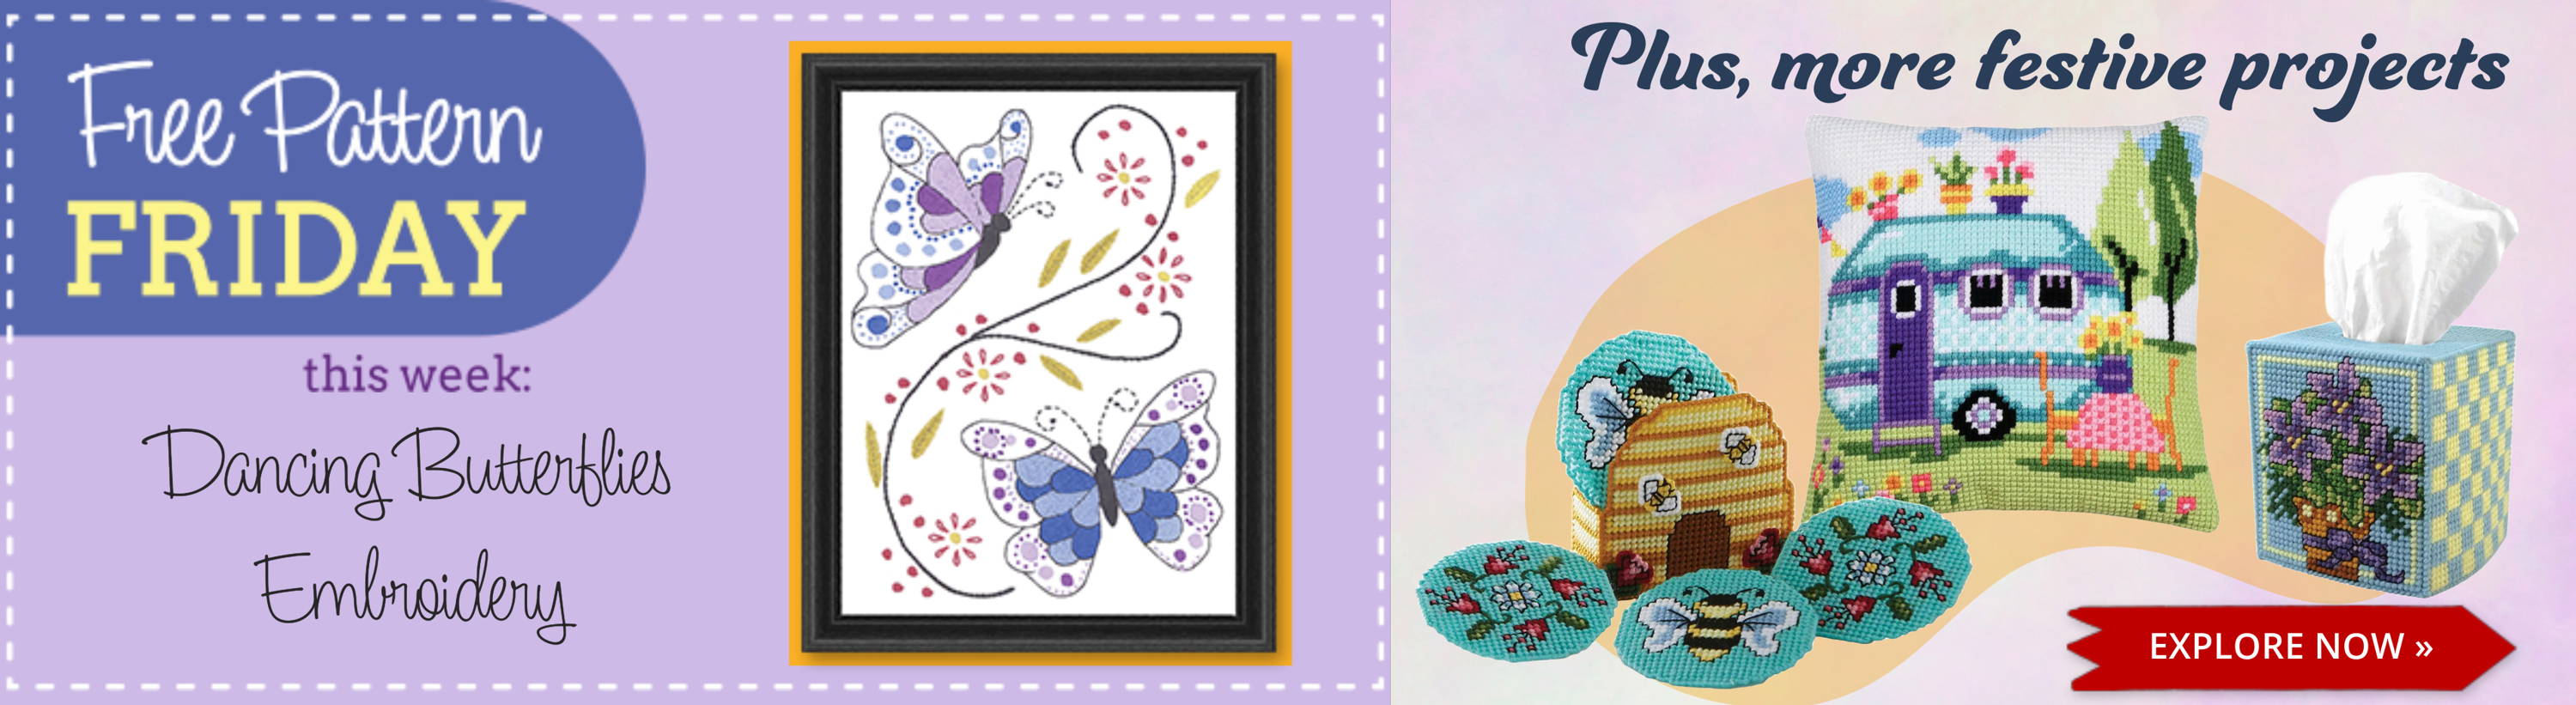 Free Pattern Friday! Dancing Butterflies Embroidery. Image: Embroidery and featured festive projects.